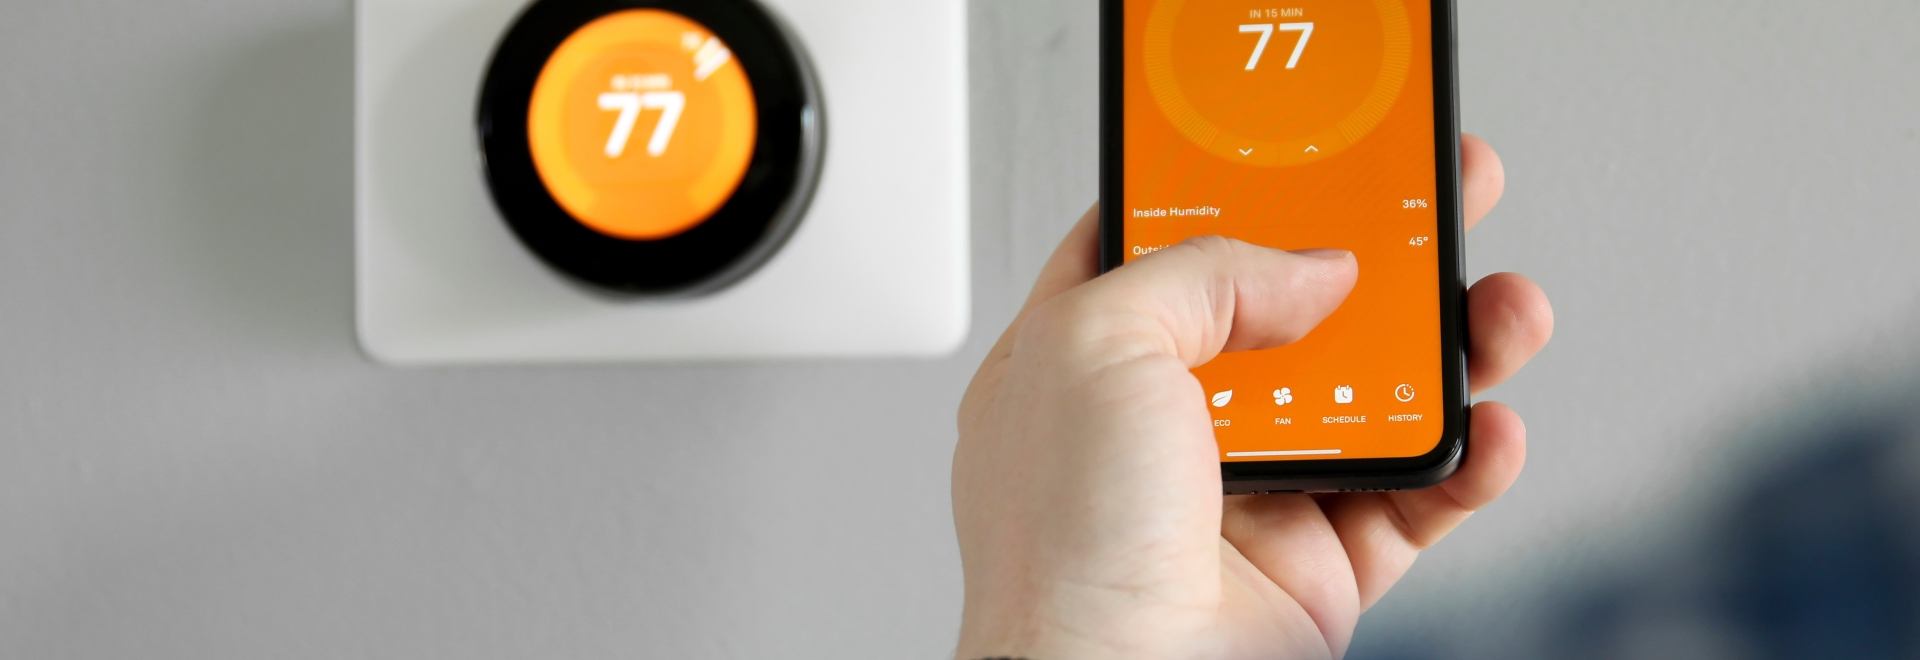 man uses his phone to control a smart thermostat